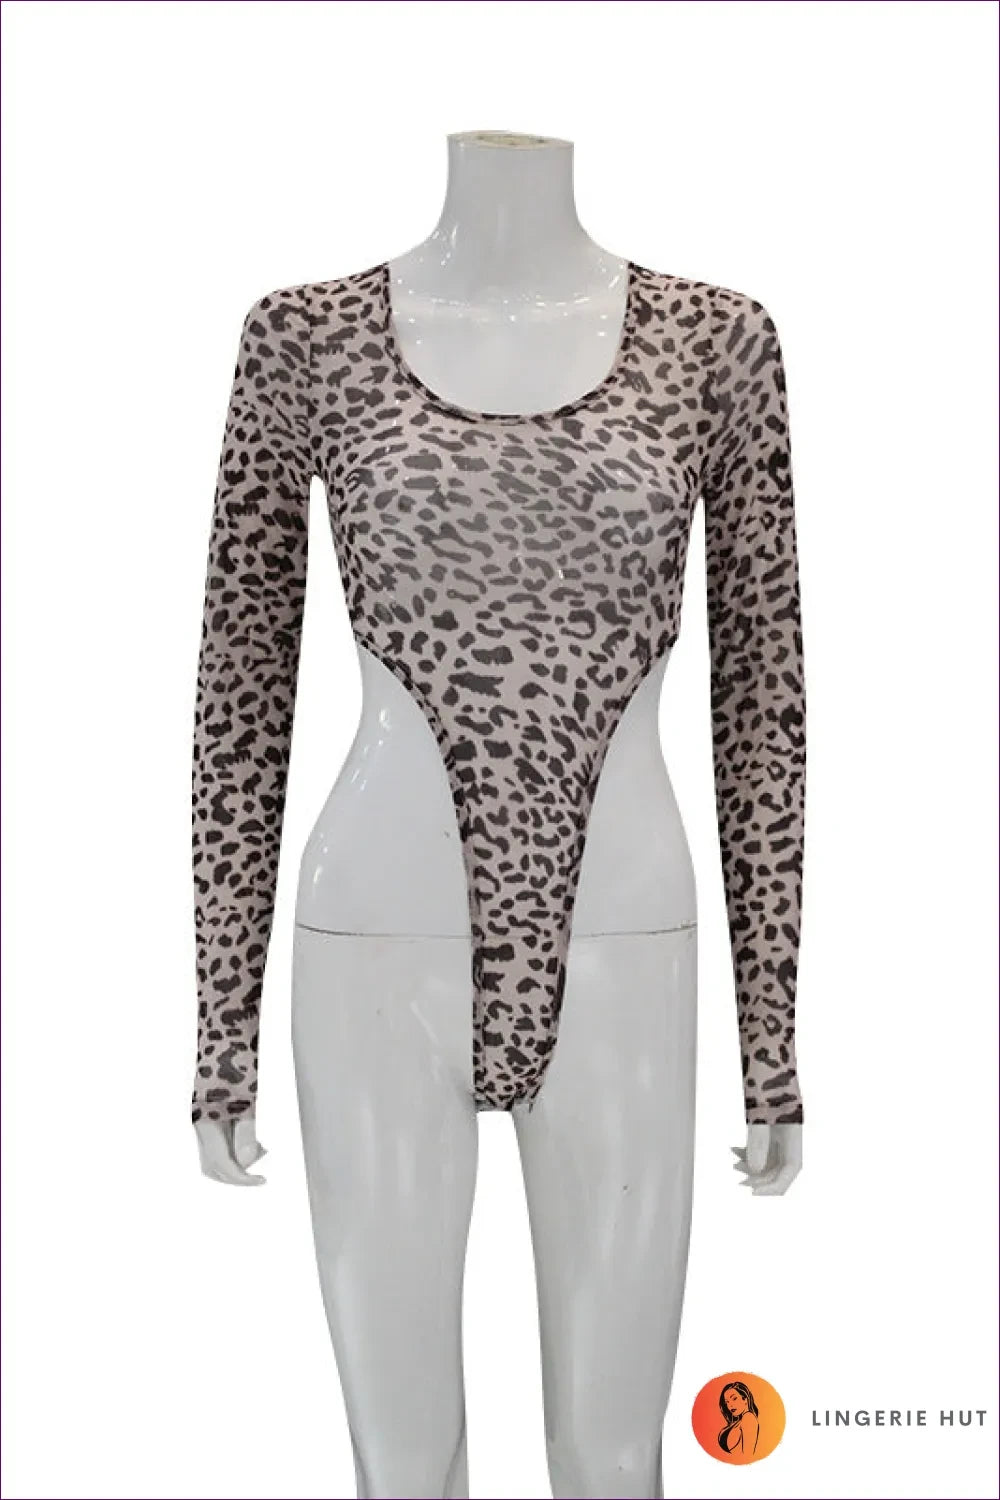 Get Ready To Turn Heads With Our Leopard Print Cut Out Long Sleeve Bodysuit. Allover Leopard Print, Daring